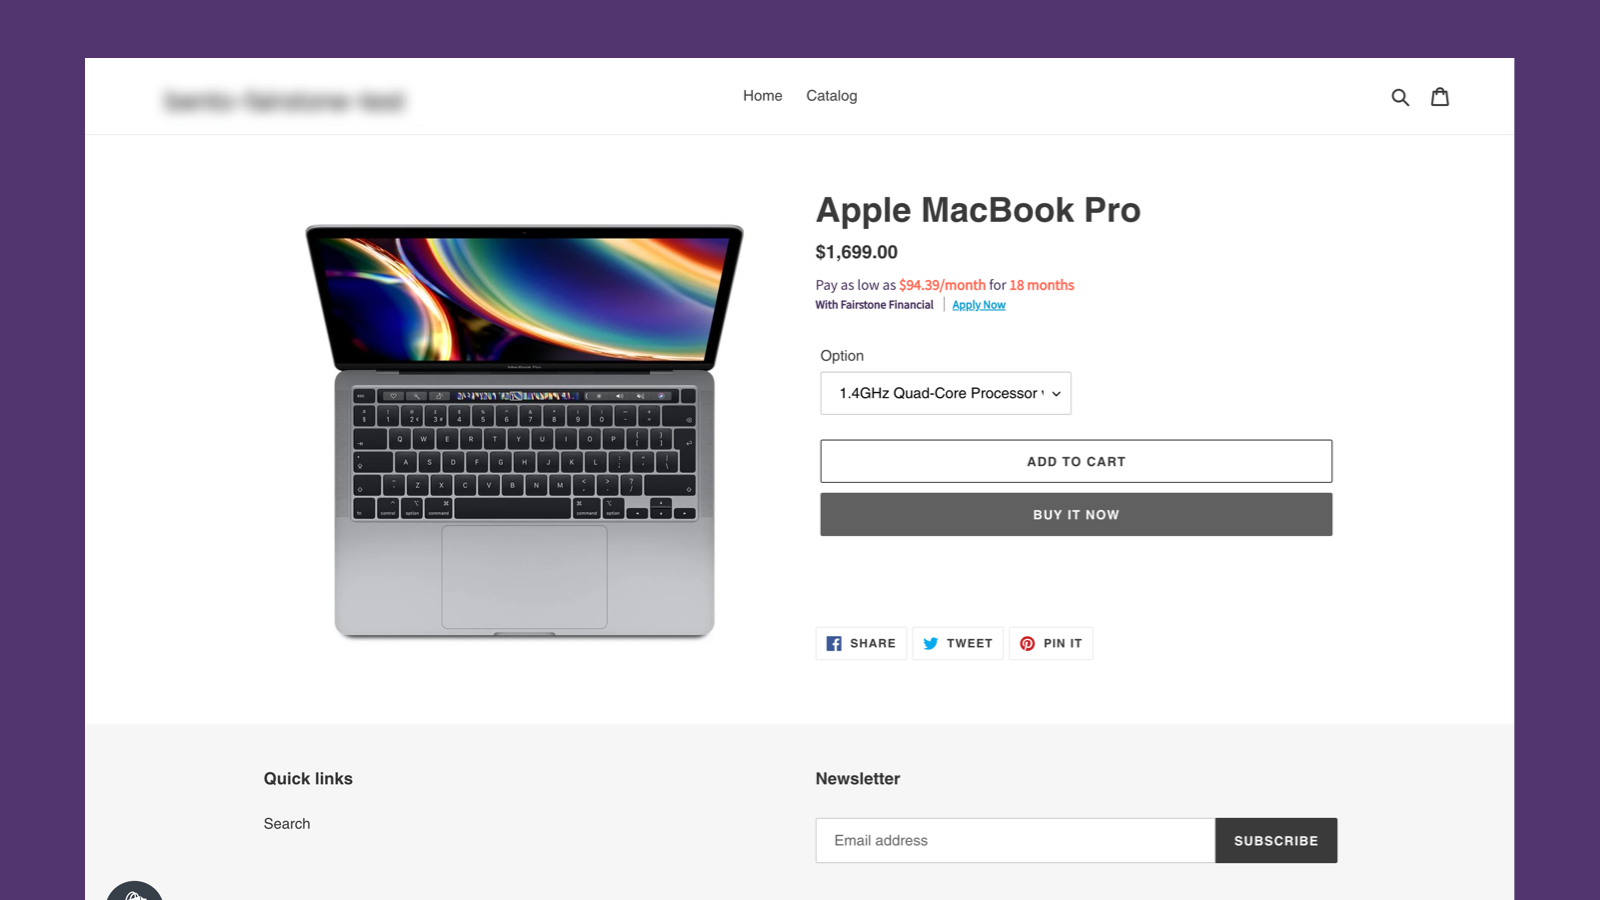 See plan pricing for products right on the product page